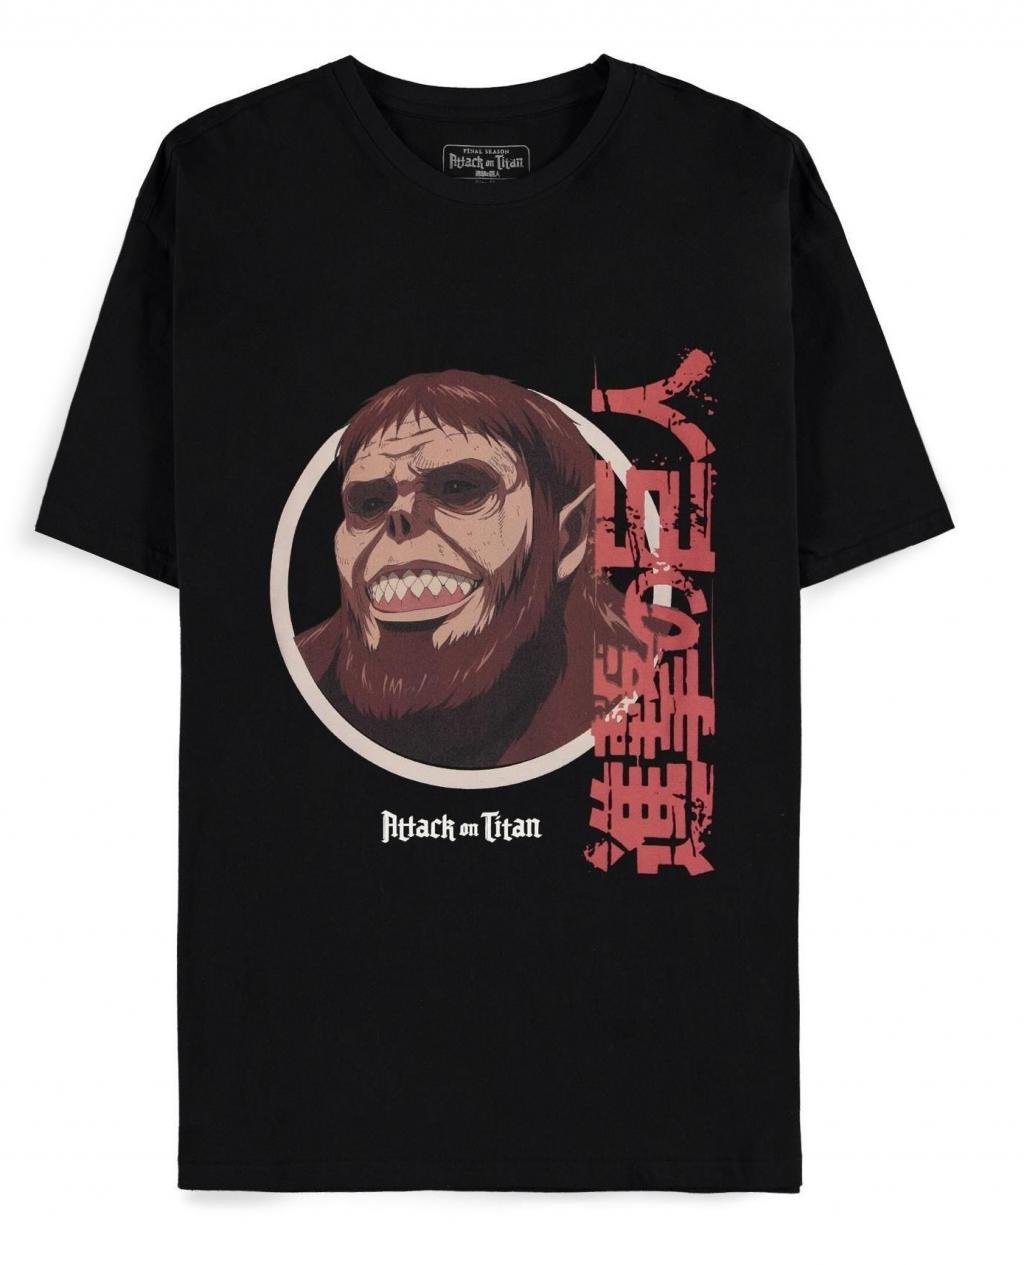 ATTACK ON TITAN - Zeke Yeager - Men's T-Shirt (S)